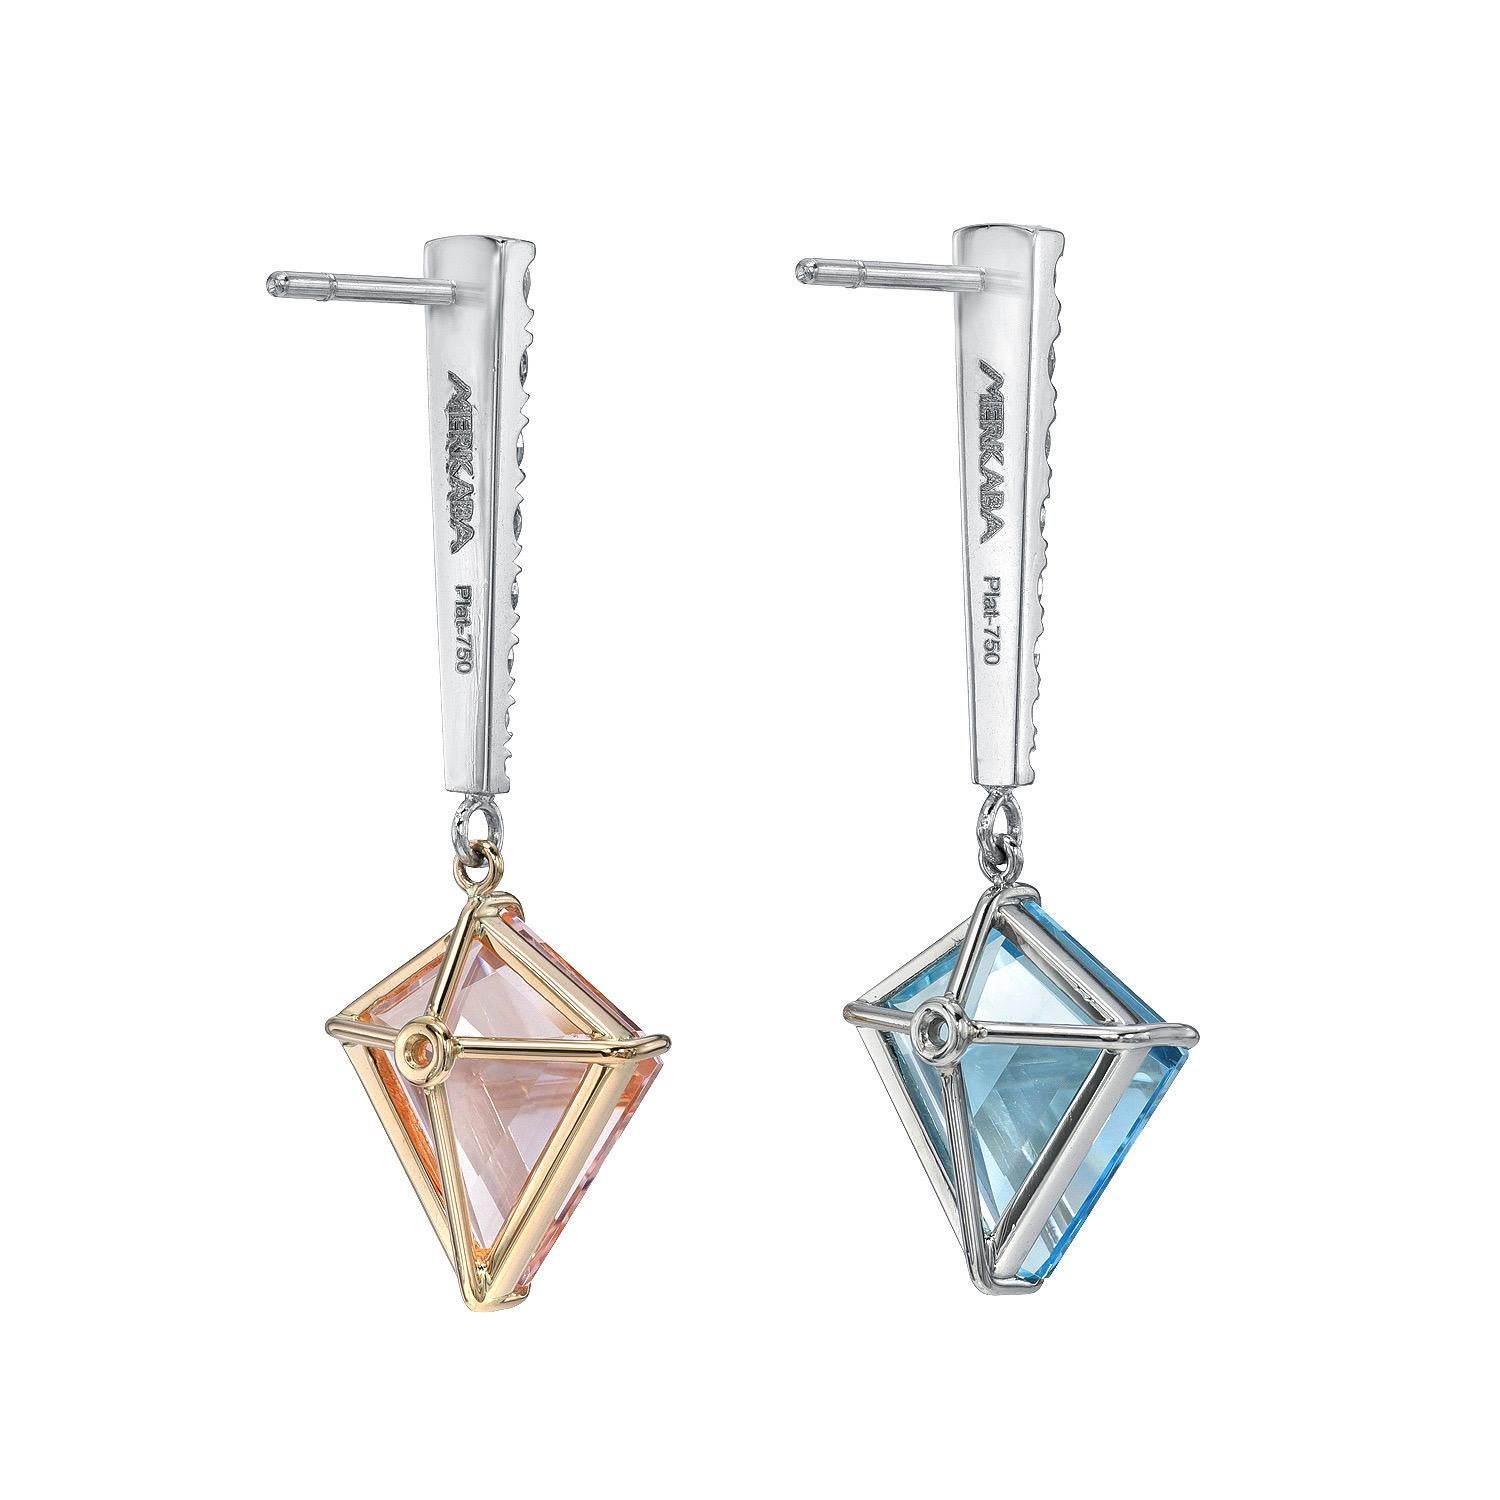 Exclusive 6.88 carat total Aquamarine and Morganite kite shape earrings, suspending from a tapered diamond bar totaling 0.77 carats.
Crafted by extremely skilled hands in the USA. Platinum and 18K rose gold.
Returns are accepted and paid by us